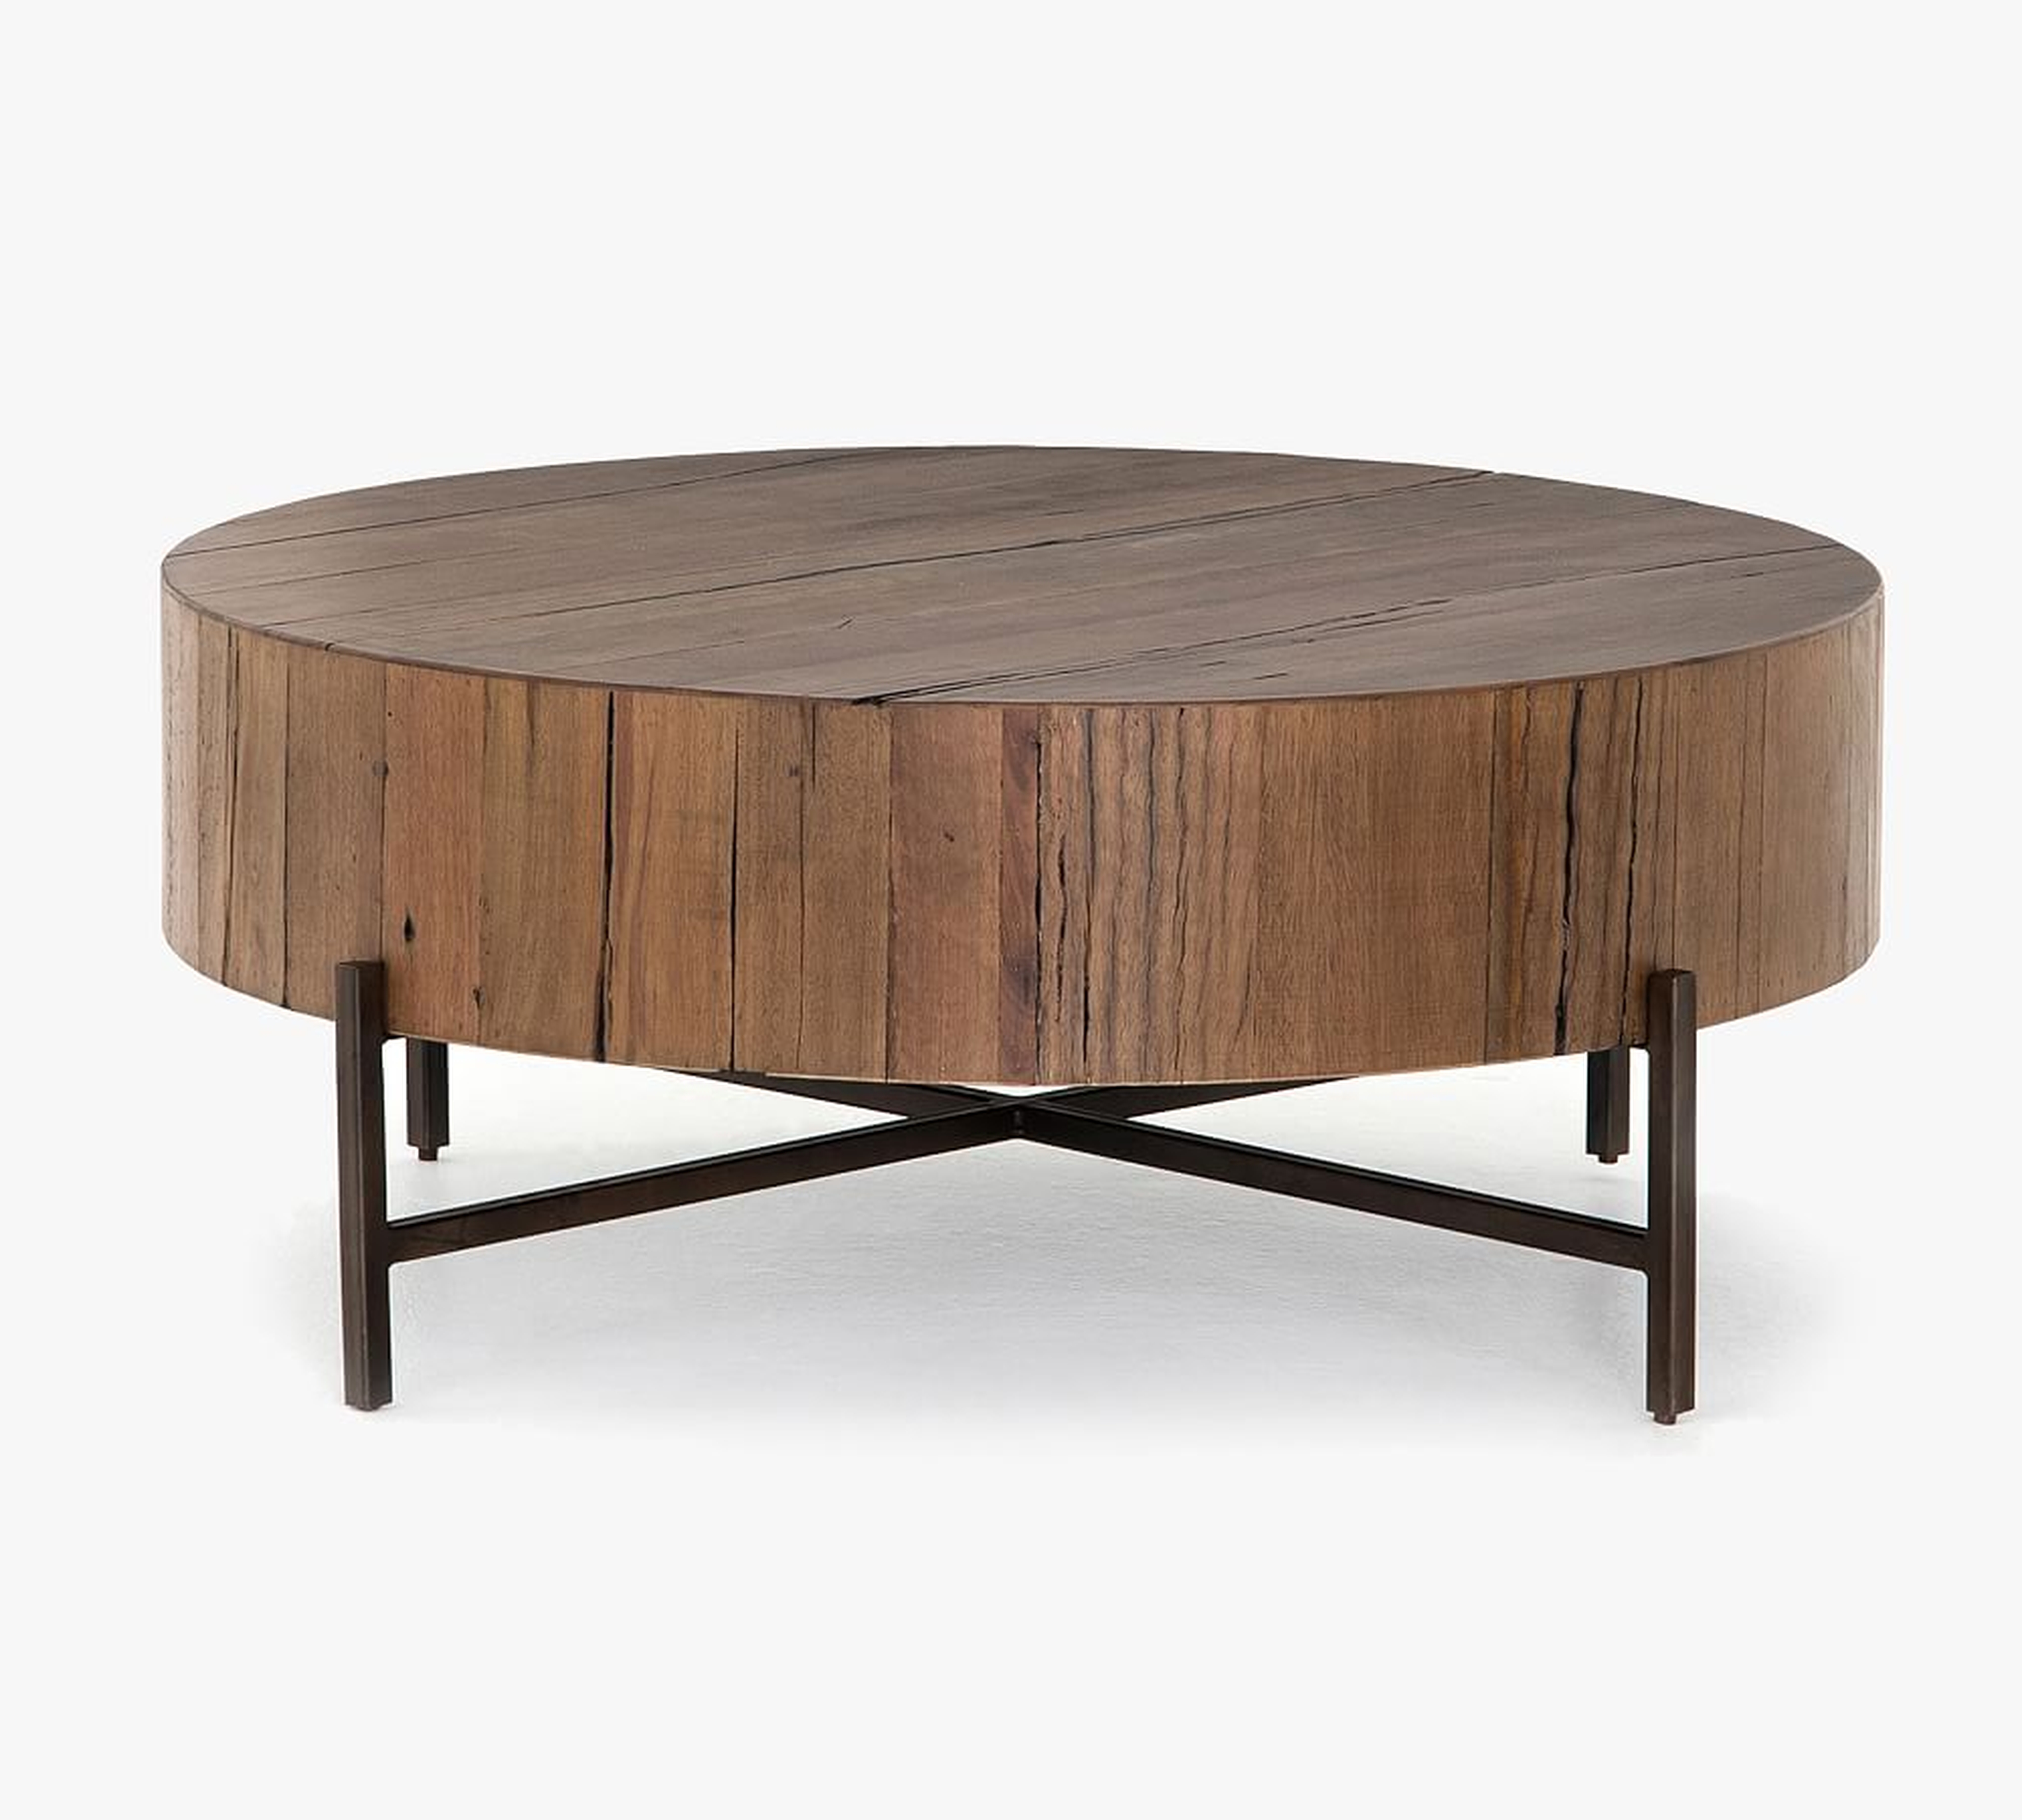 Fargo Reclaimed Wood Coffee Table, Natural Brown - Pottery Barn